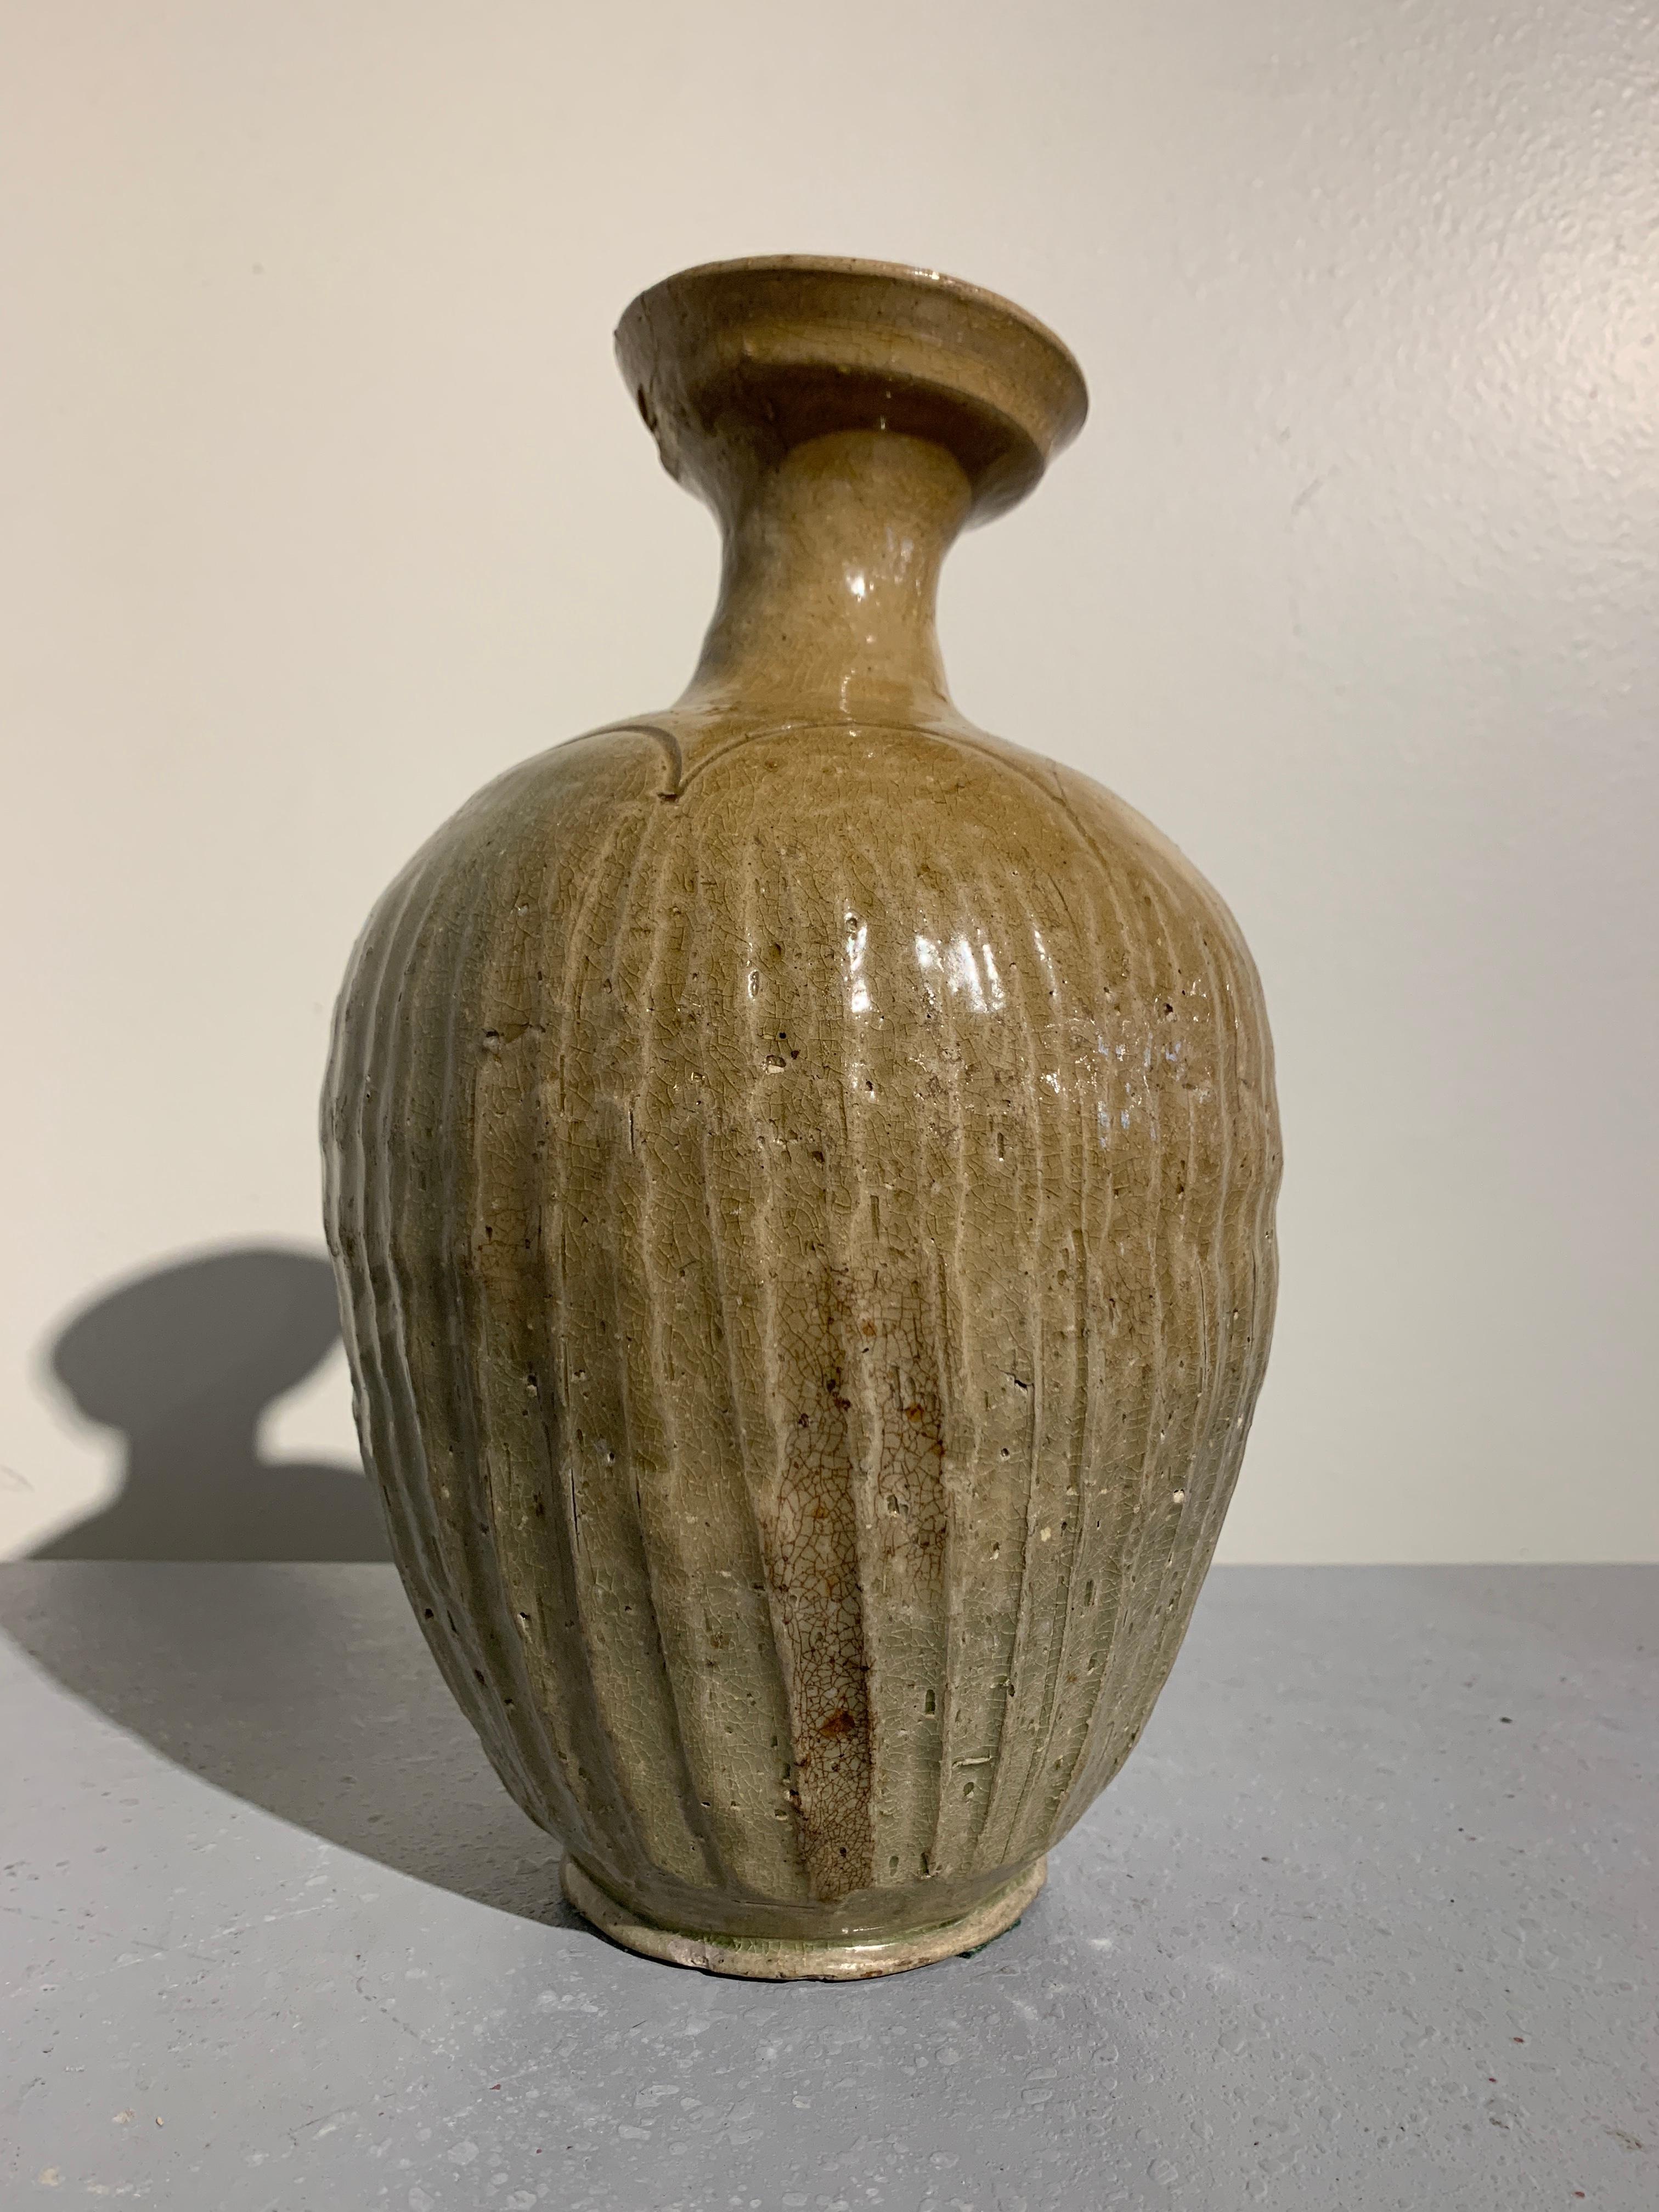 A wonderful early Korean Goryeo (Koryo) Dynasty celadon glazed stoneware bottle vase with ribbed body and cup mouth, late 11th-early 12th century, Korea.

The bottle vase, originally for serving wine, features an ovoid body with distinct, vertical